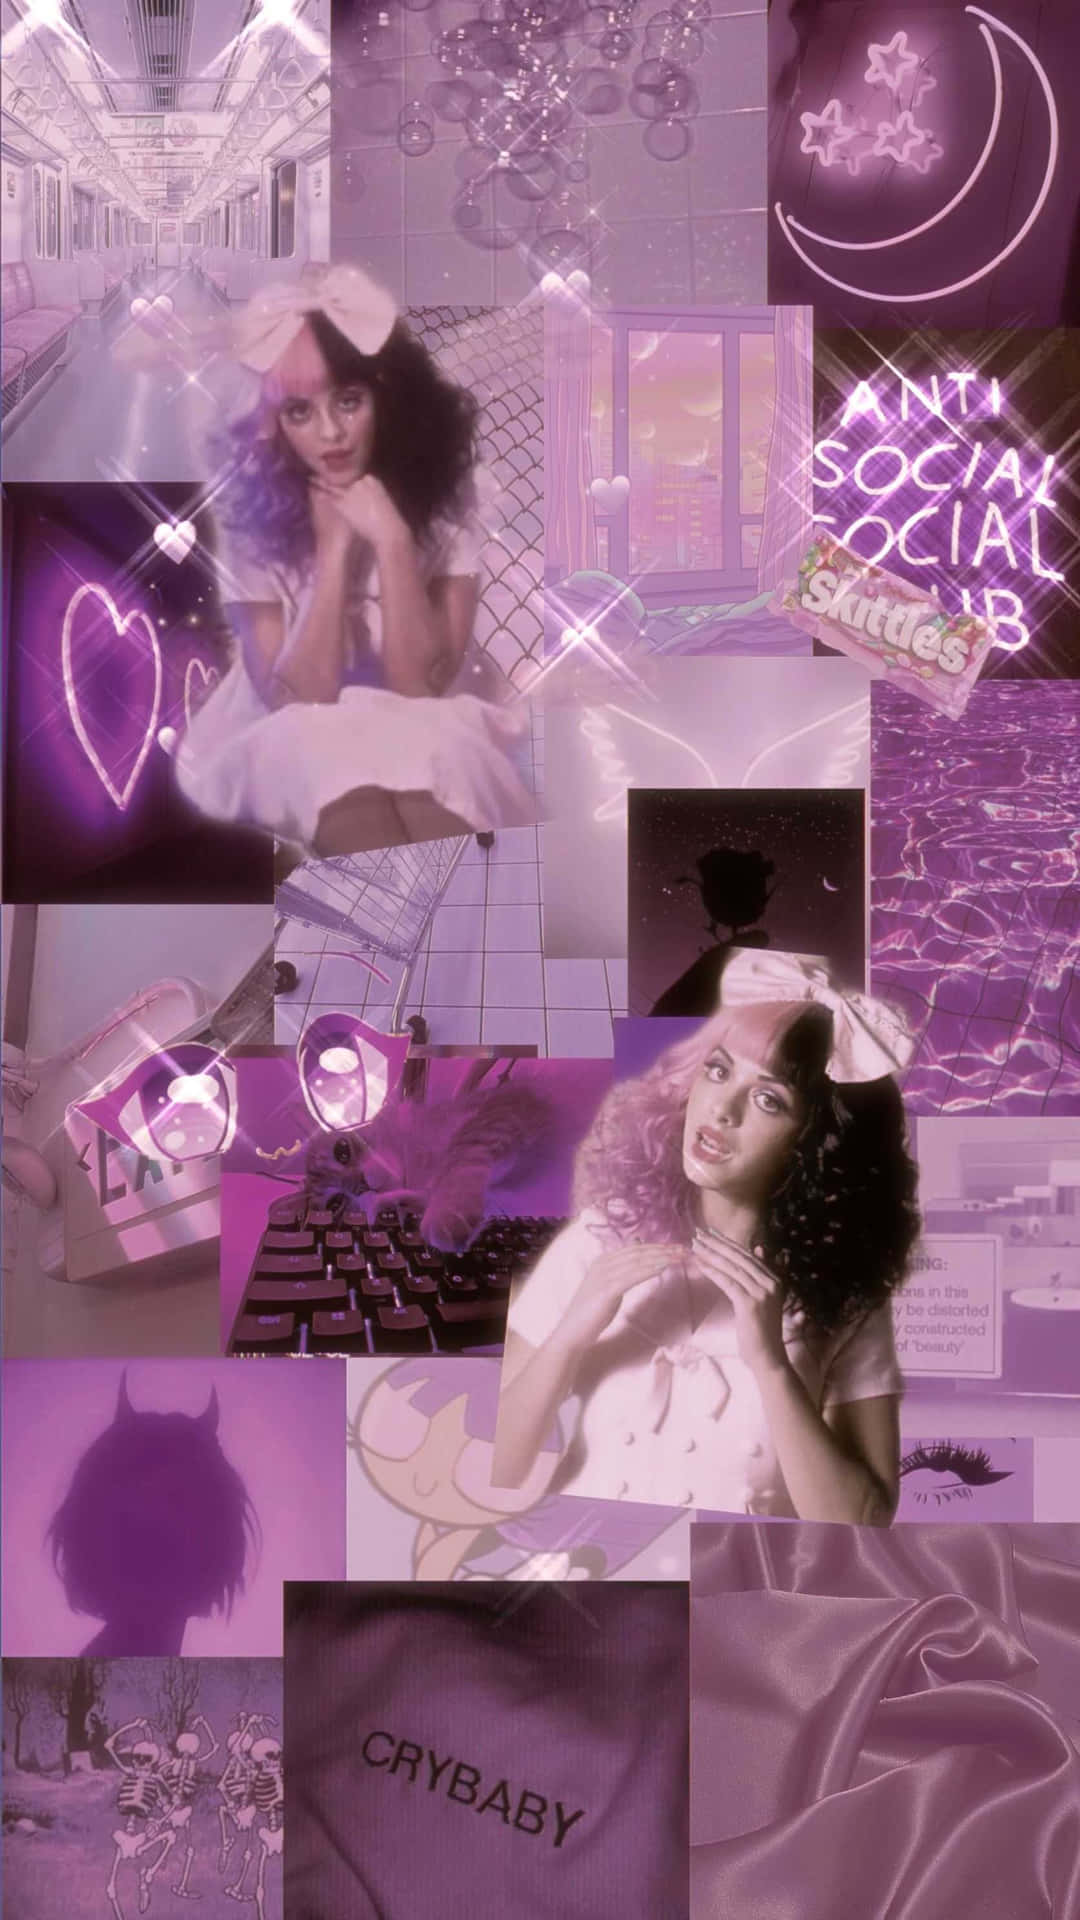 Make a statement in bold colors with this Melanie Martinez Aesthetic wallpaper Wallpaper